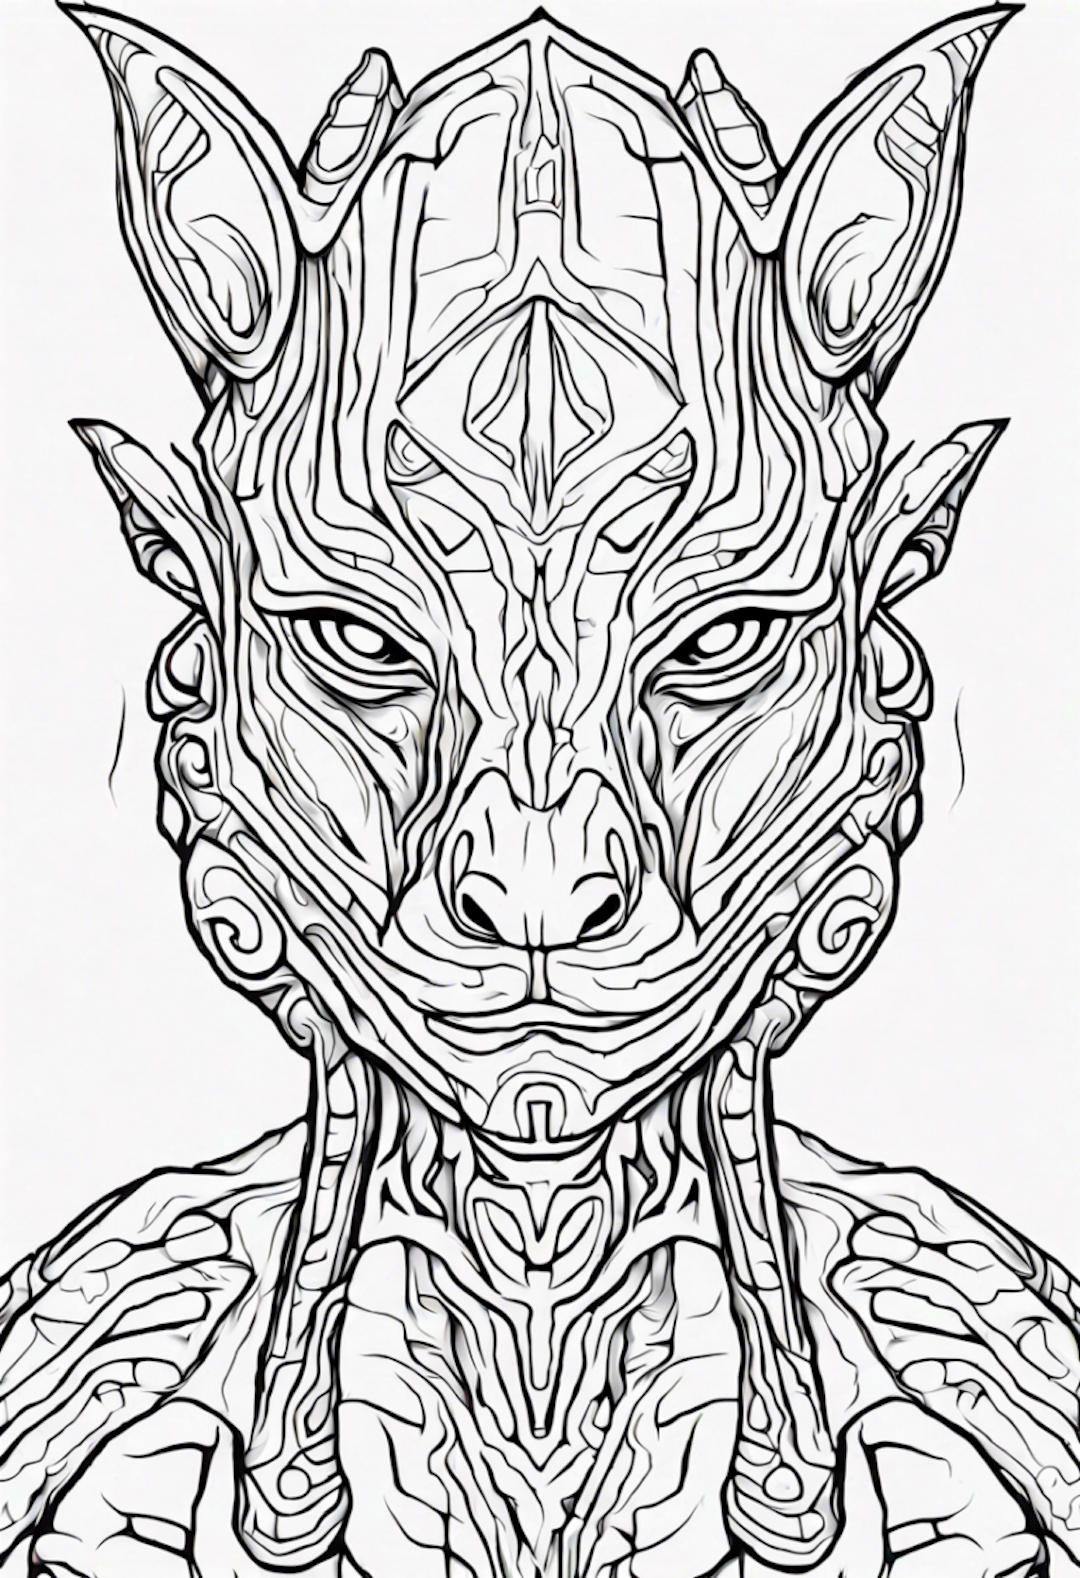 Mystical Feline Guardian Coloring Page coloring pages